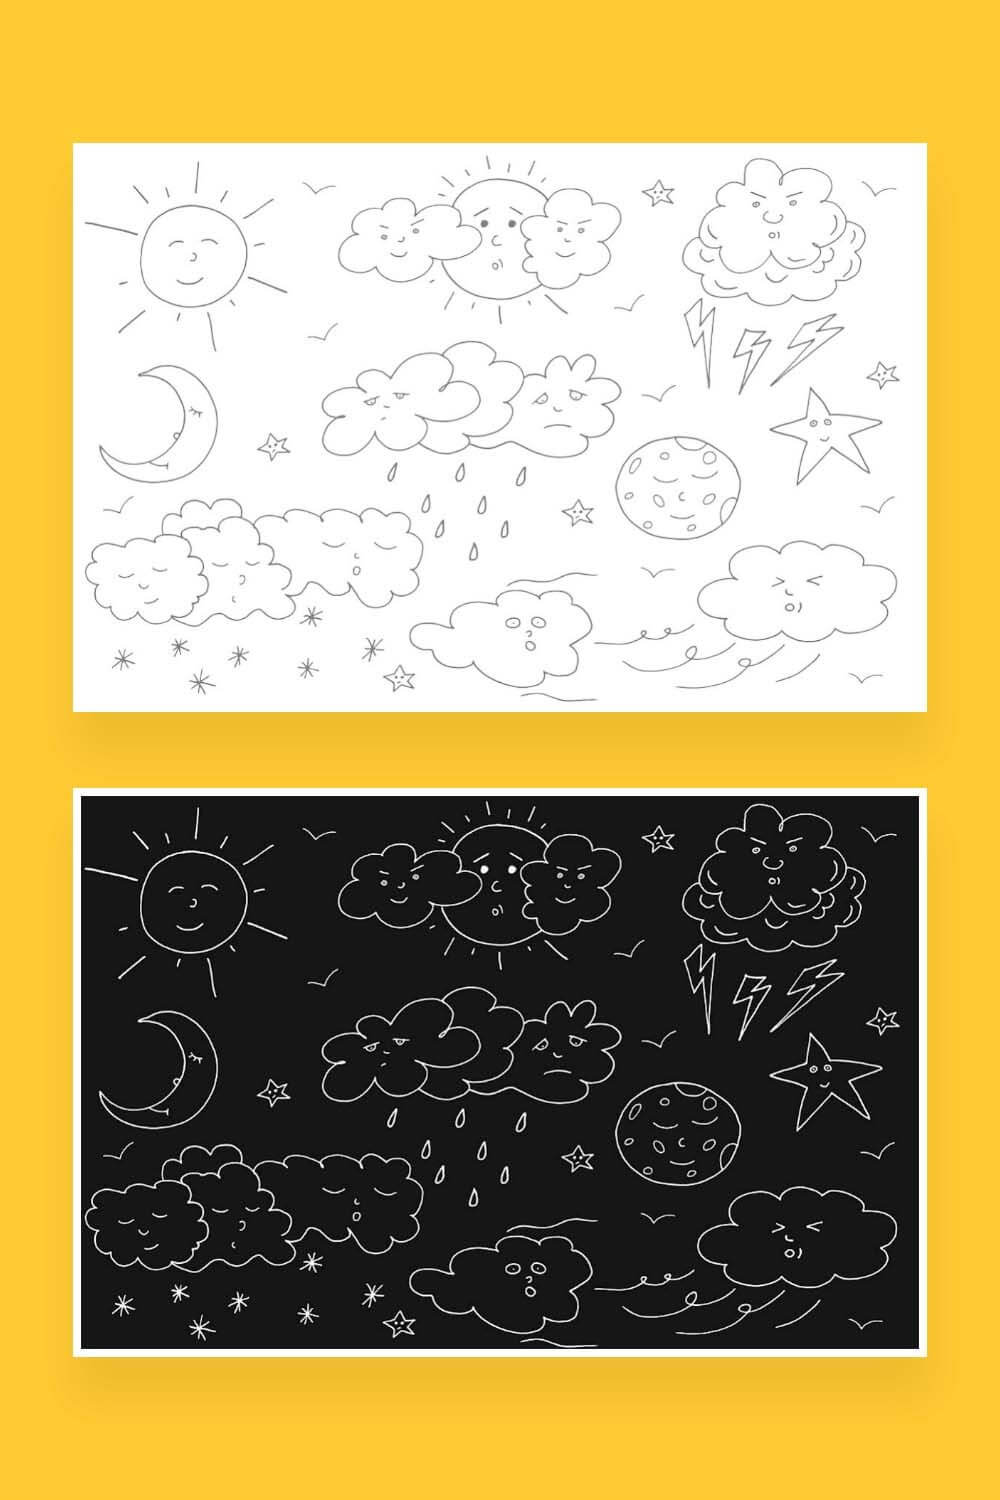 Different set of weather phenomena hand drawn doodles on a white and black background.